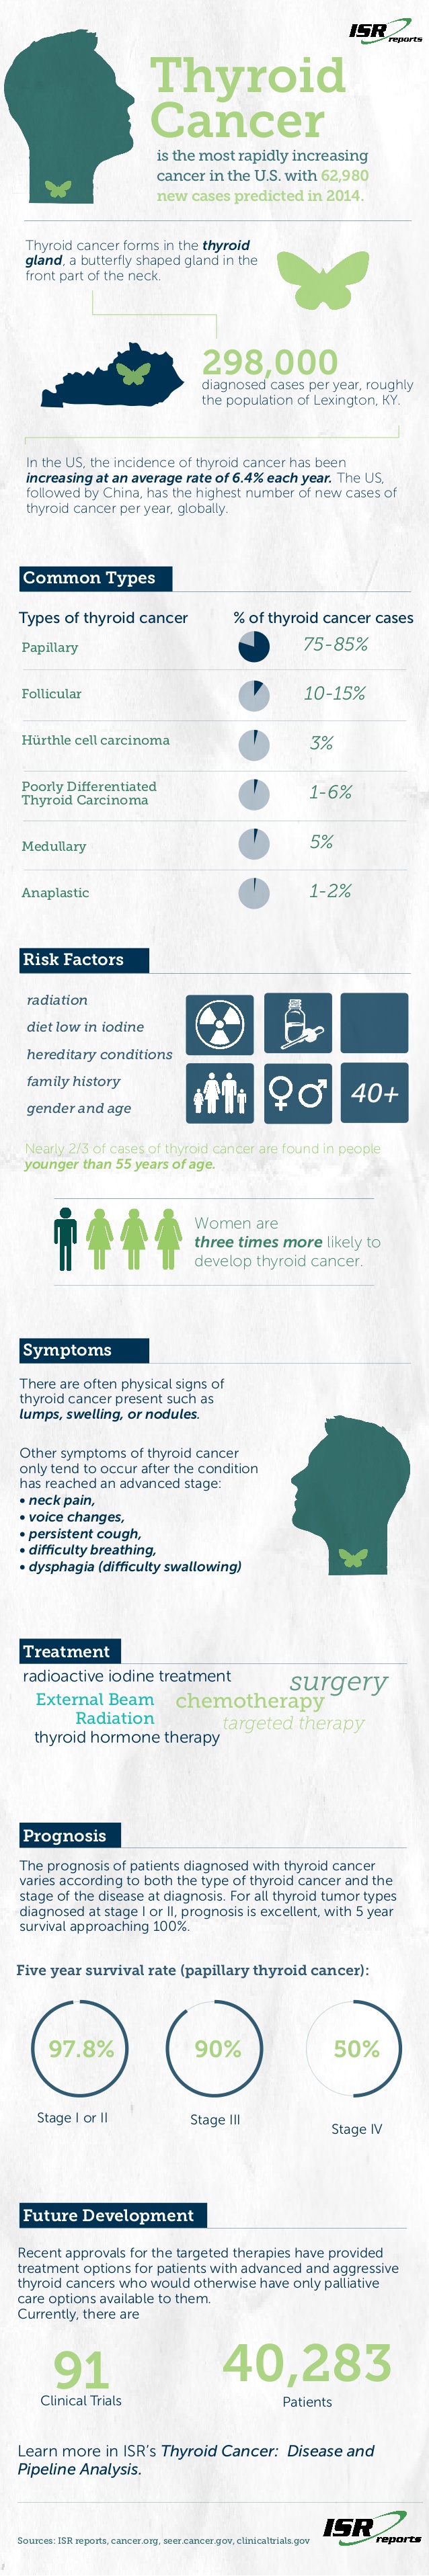 infographic-thyroid-cancer-disease-and-pipeline-analysis-1-638